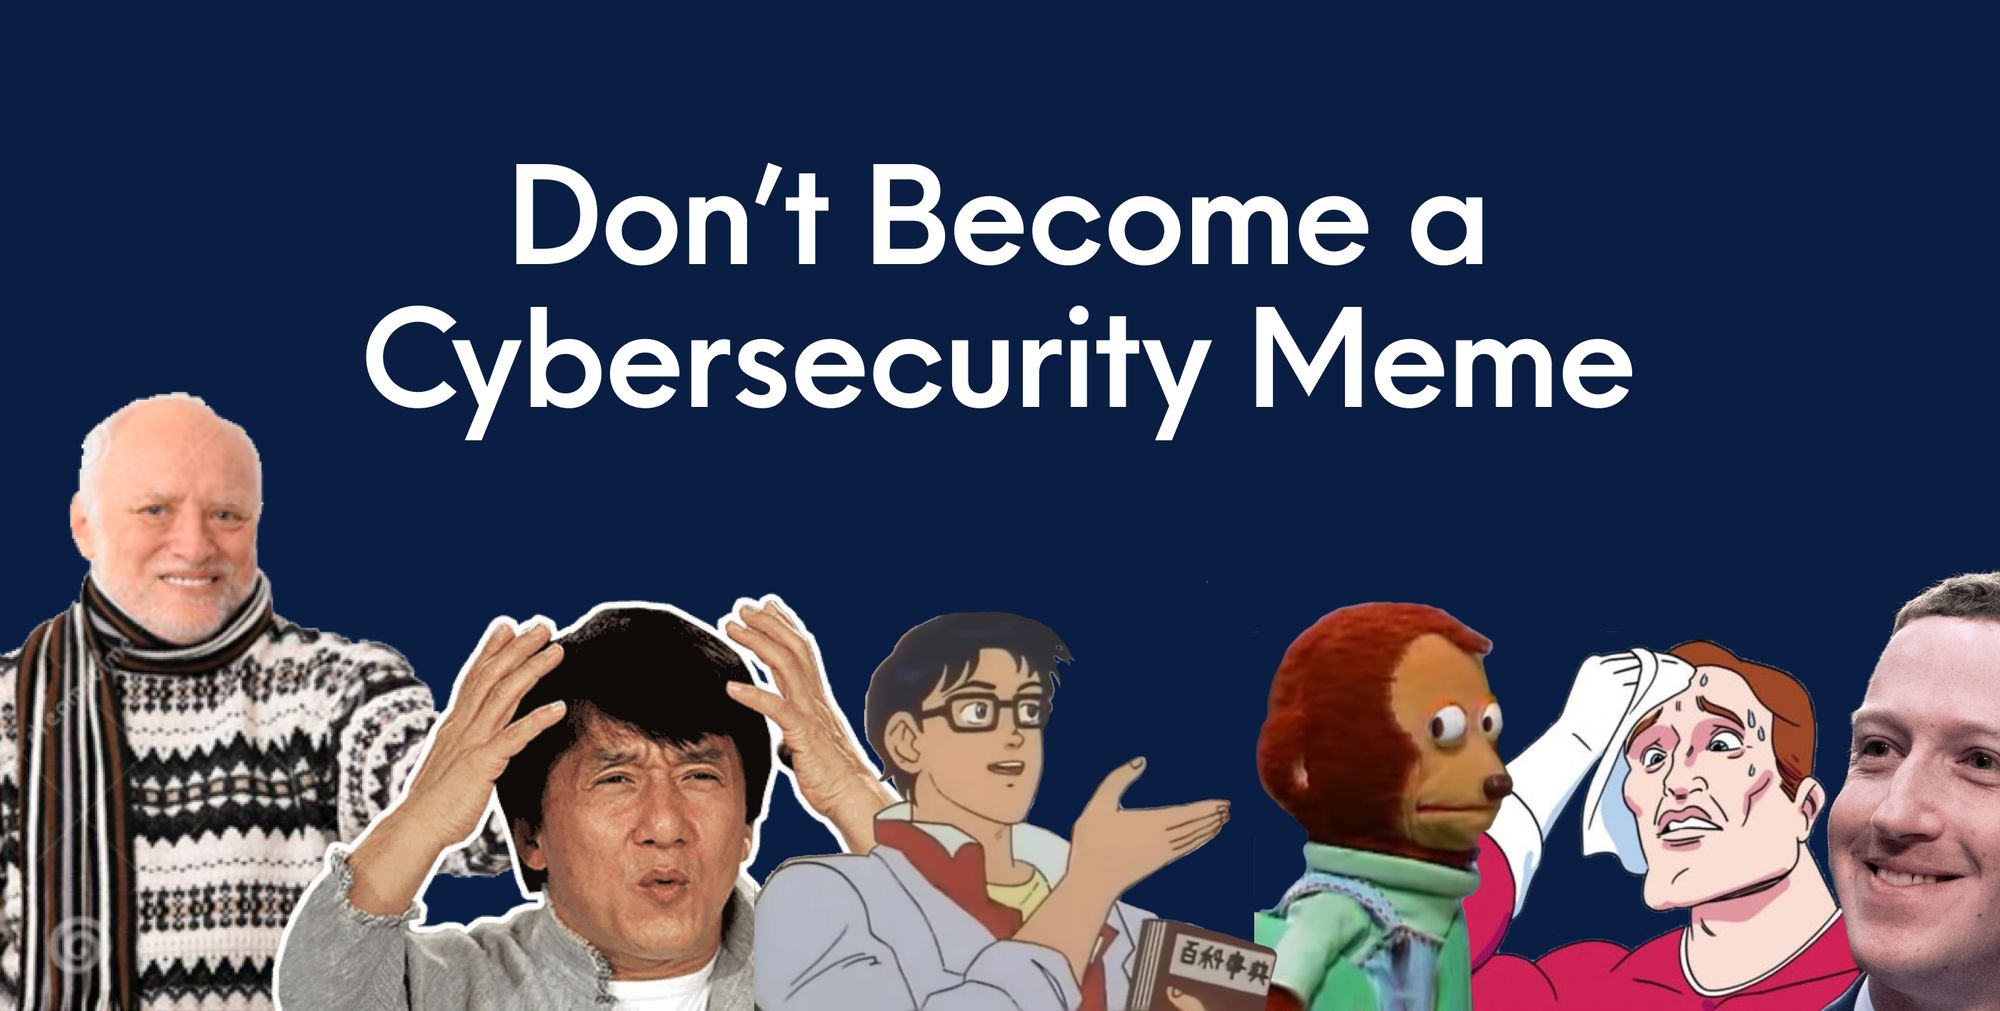 Don’t Become a Cybersecurity Meme: 31 Funny But Sad Security Memes About Internet Privacy